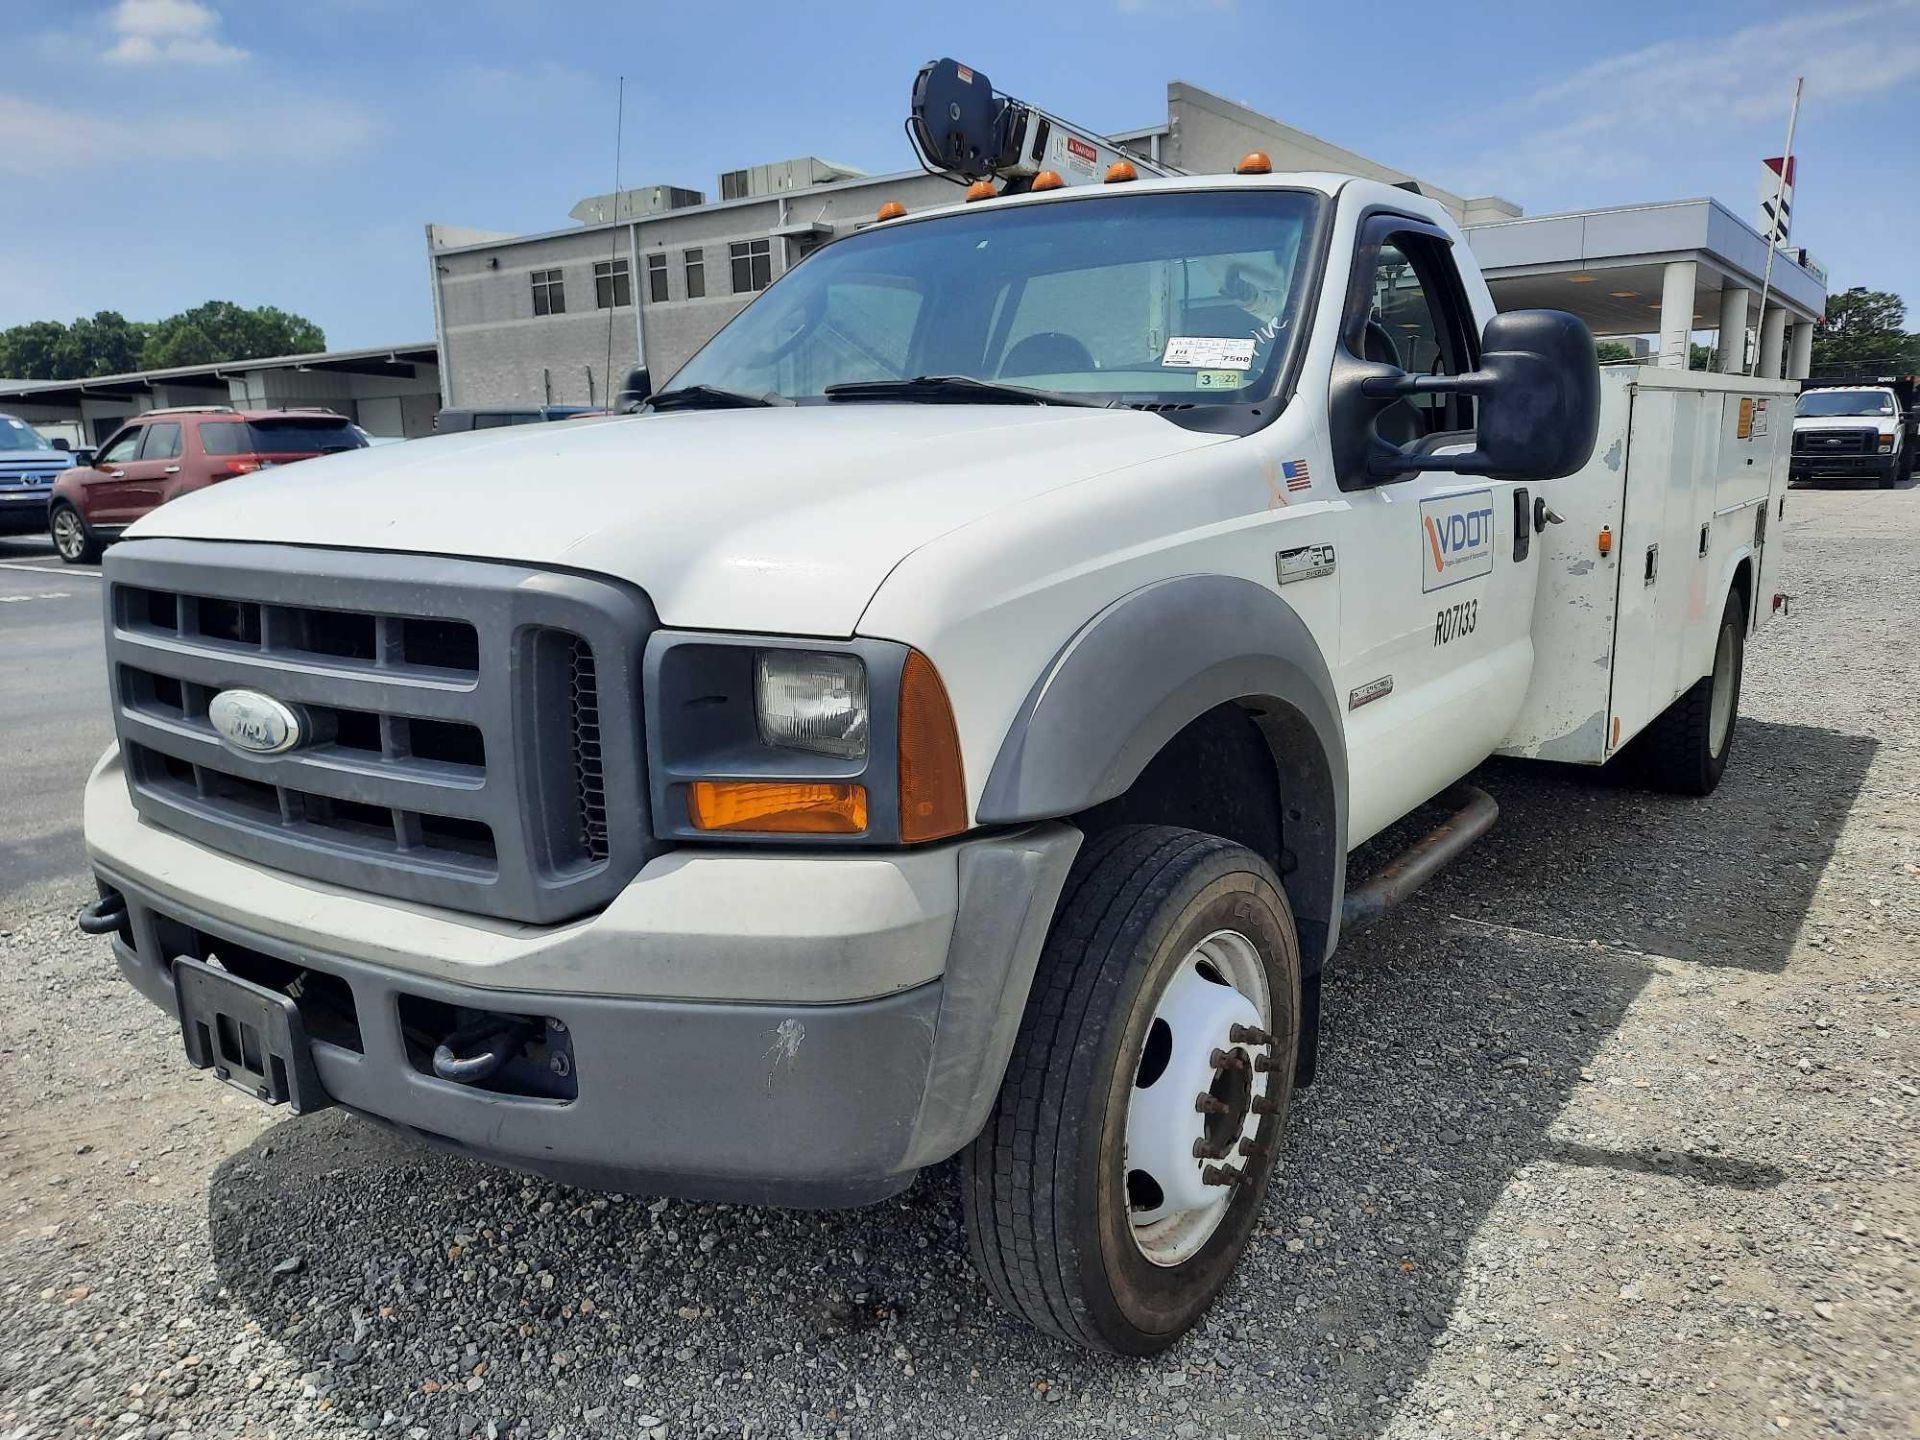 2005 Ford F450 Super Duty Utility Body Truck - Image 7 of 48